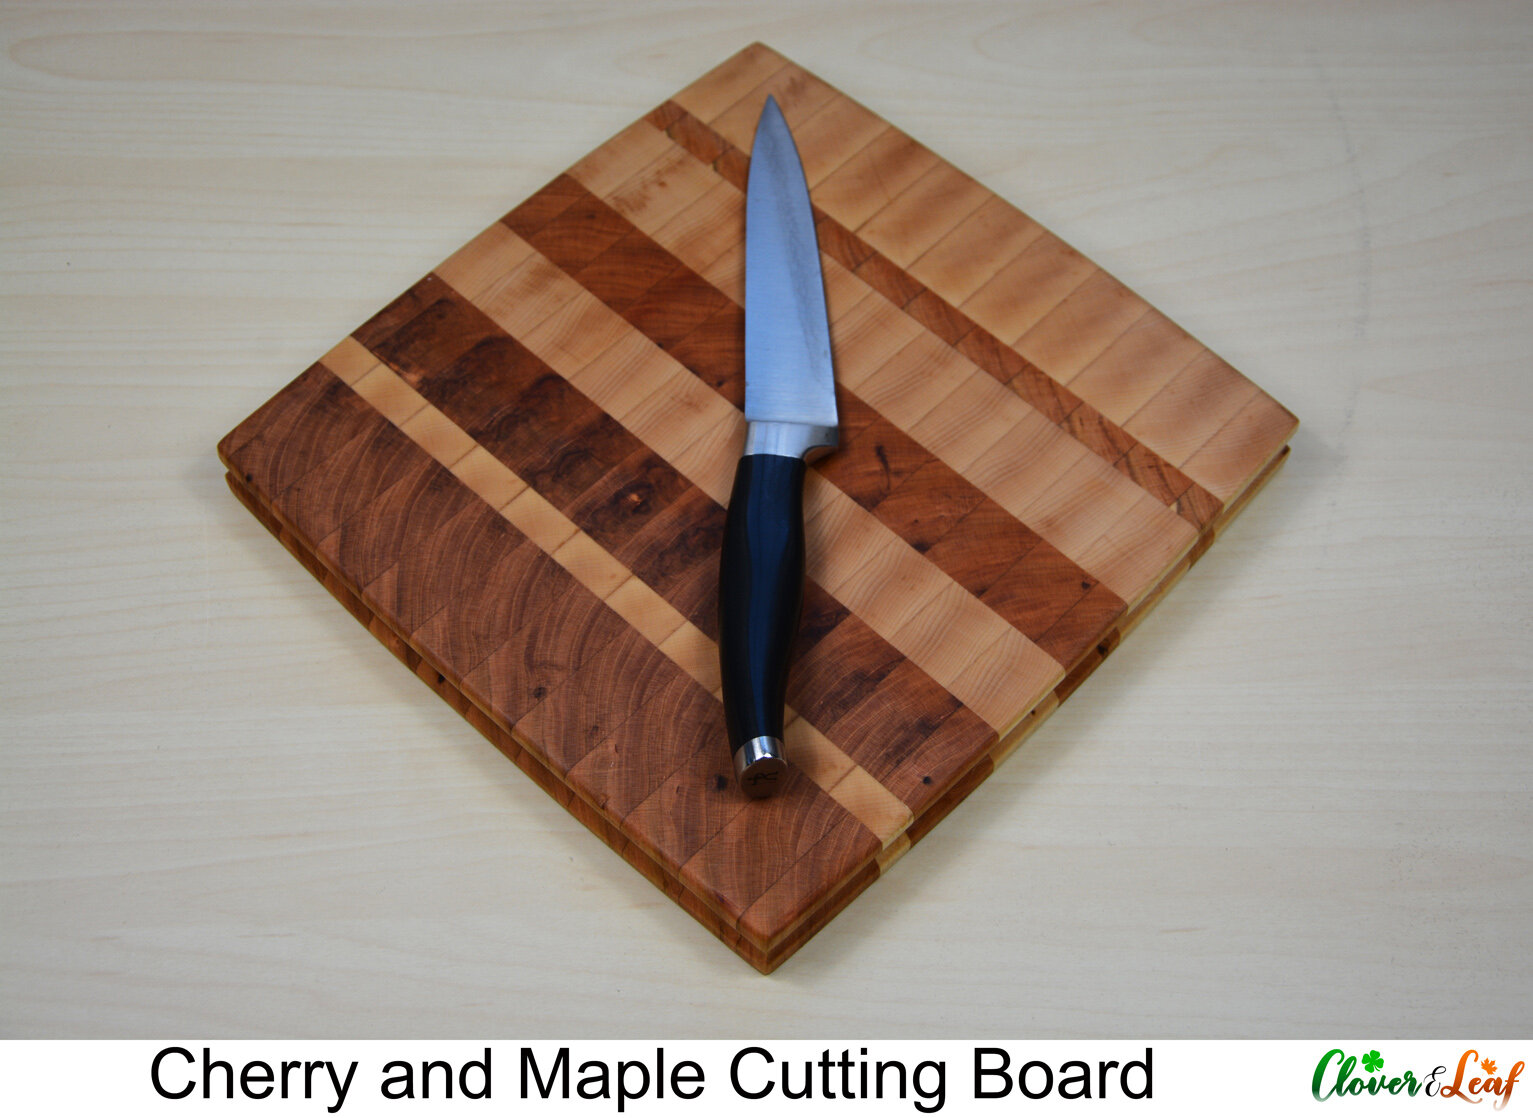 Cherry and Walnut Cutting Board From Above with Knife.jpg